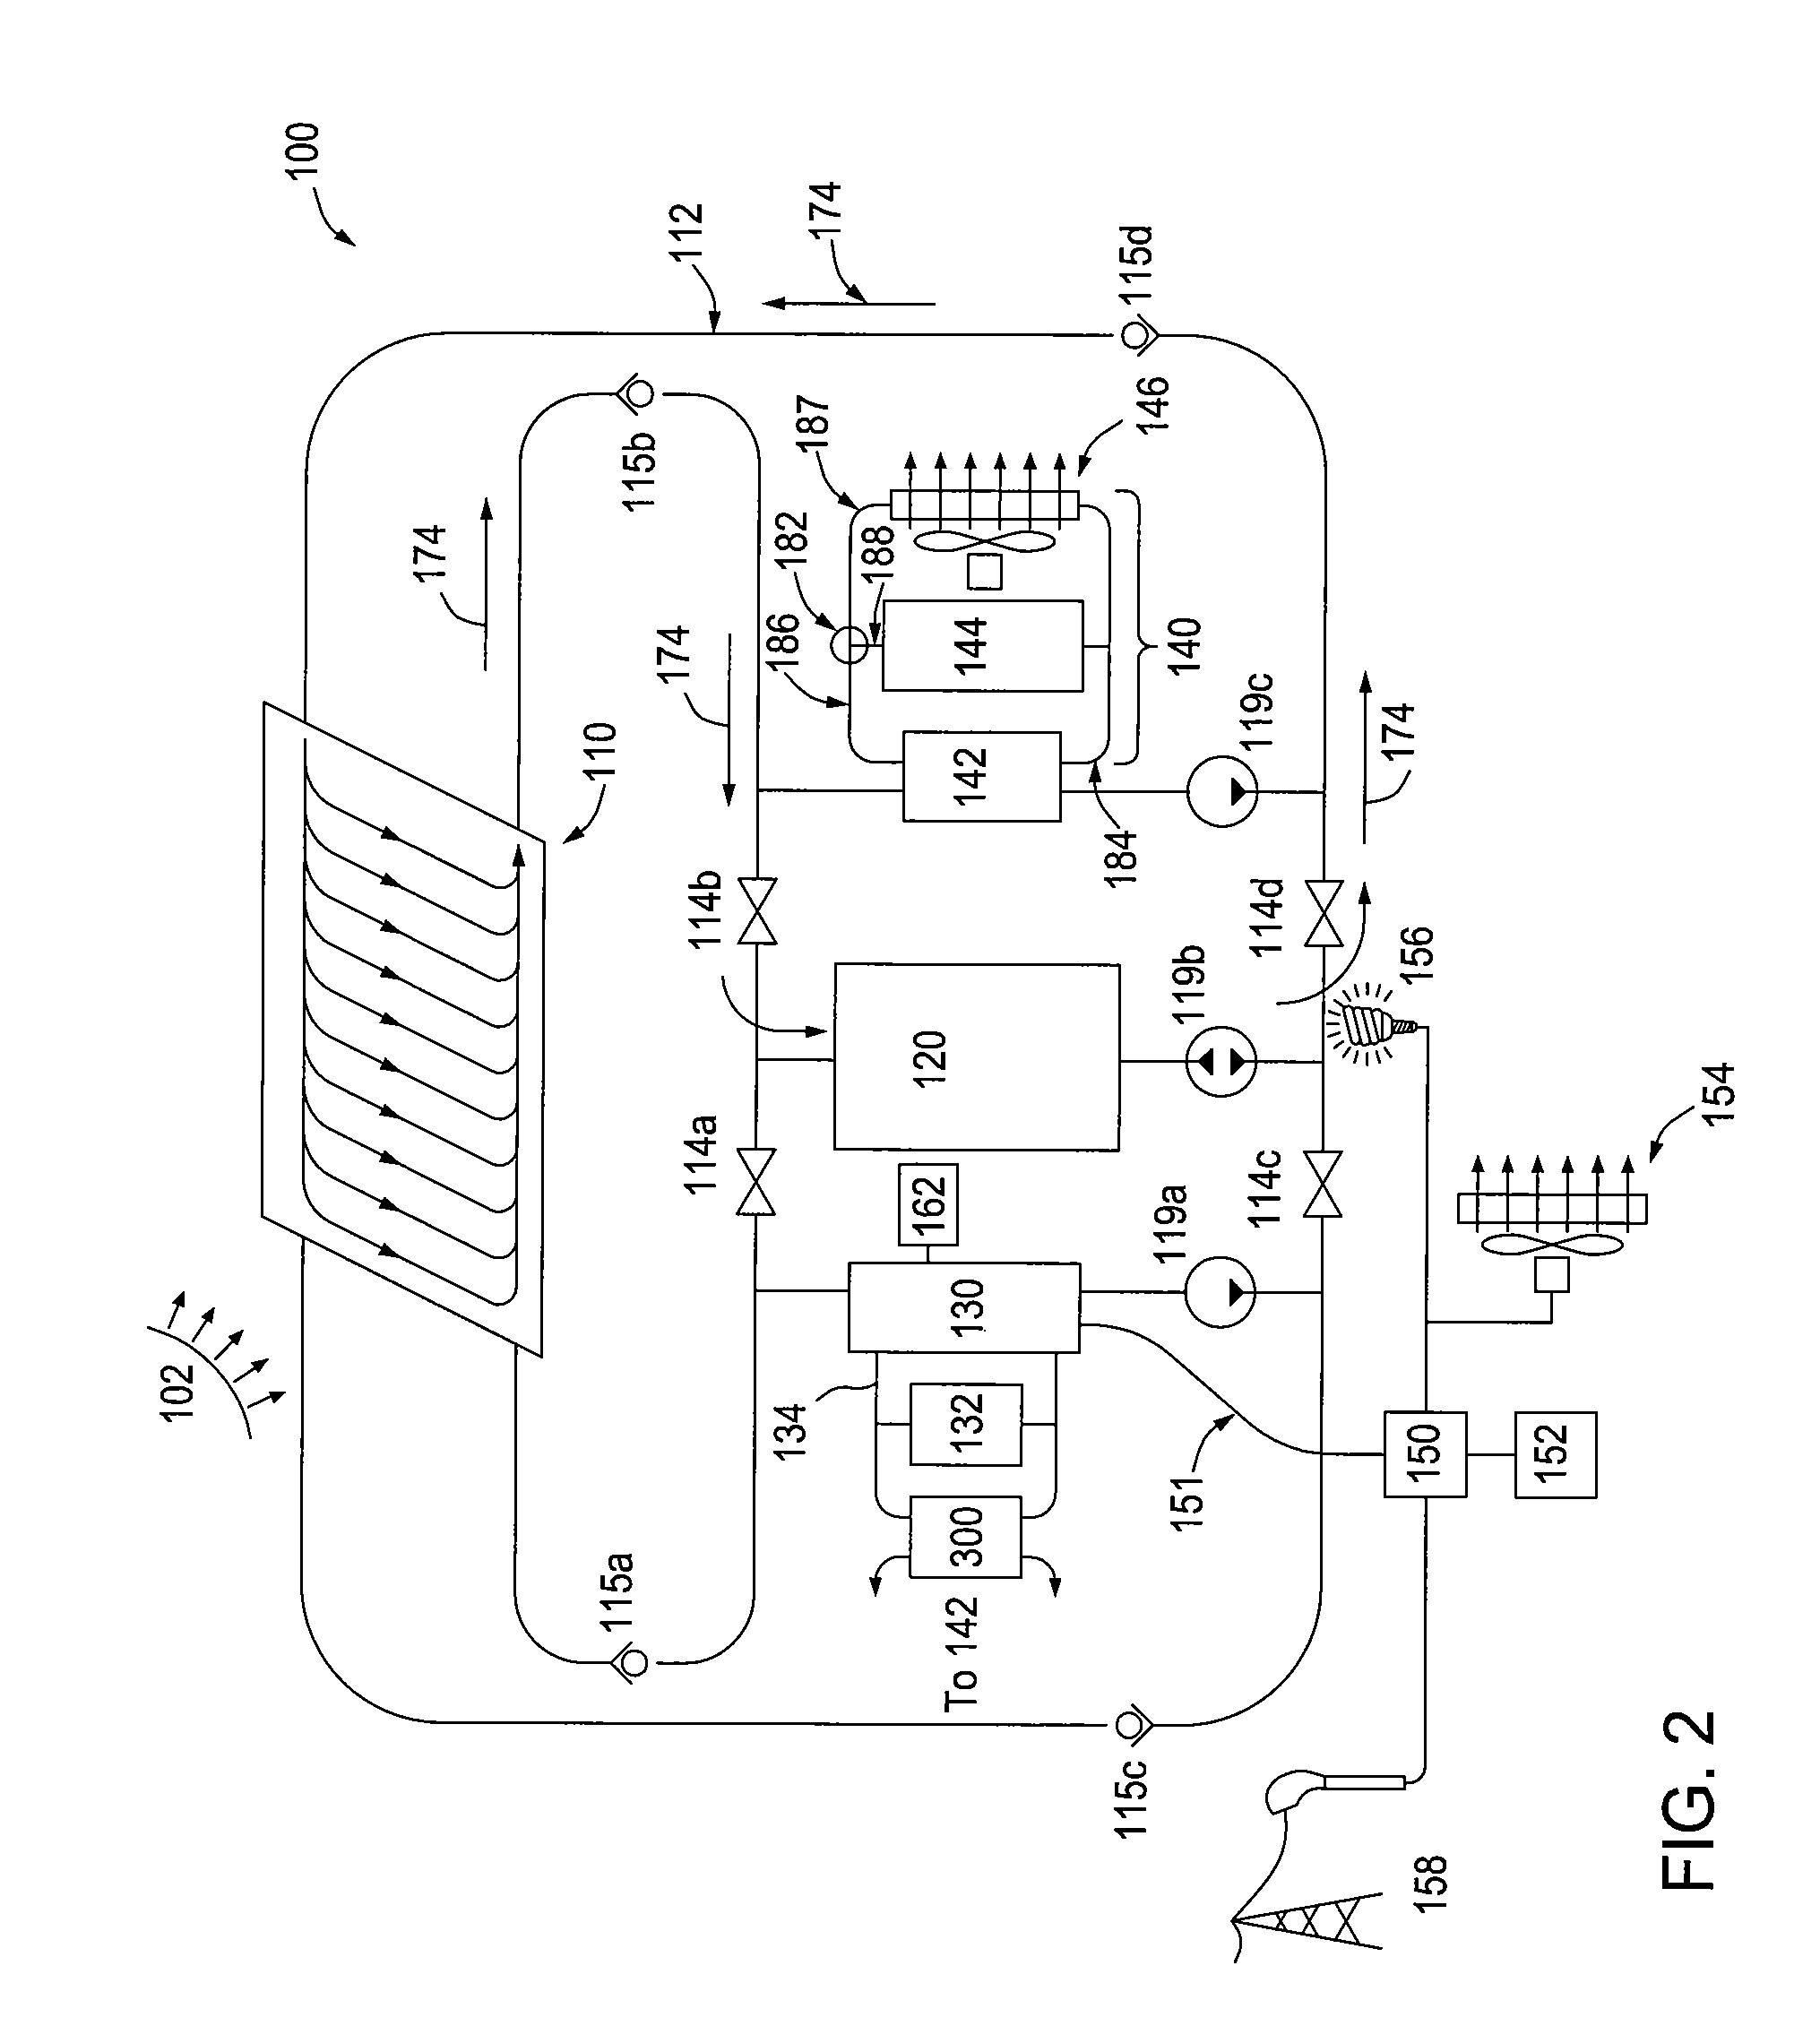 Control of power generation system having thermal energy and thermodynamic engine components